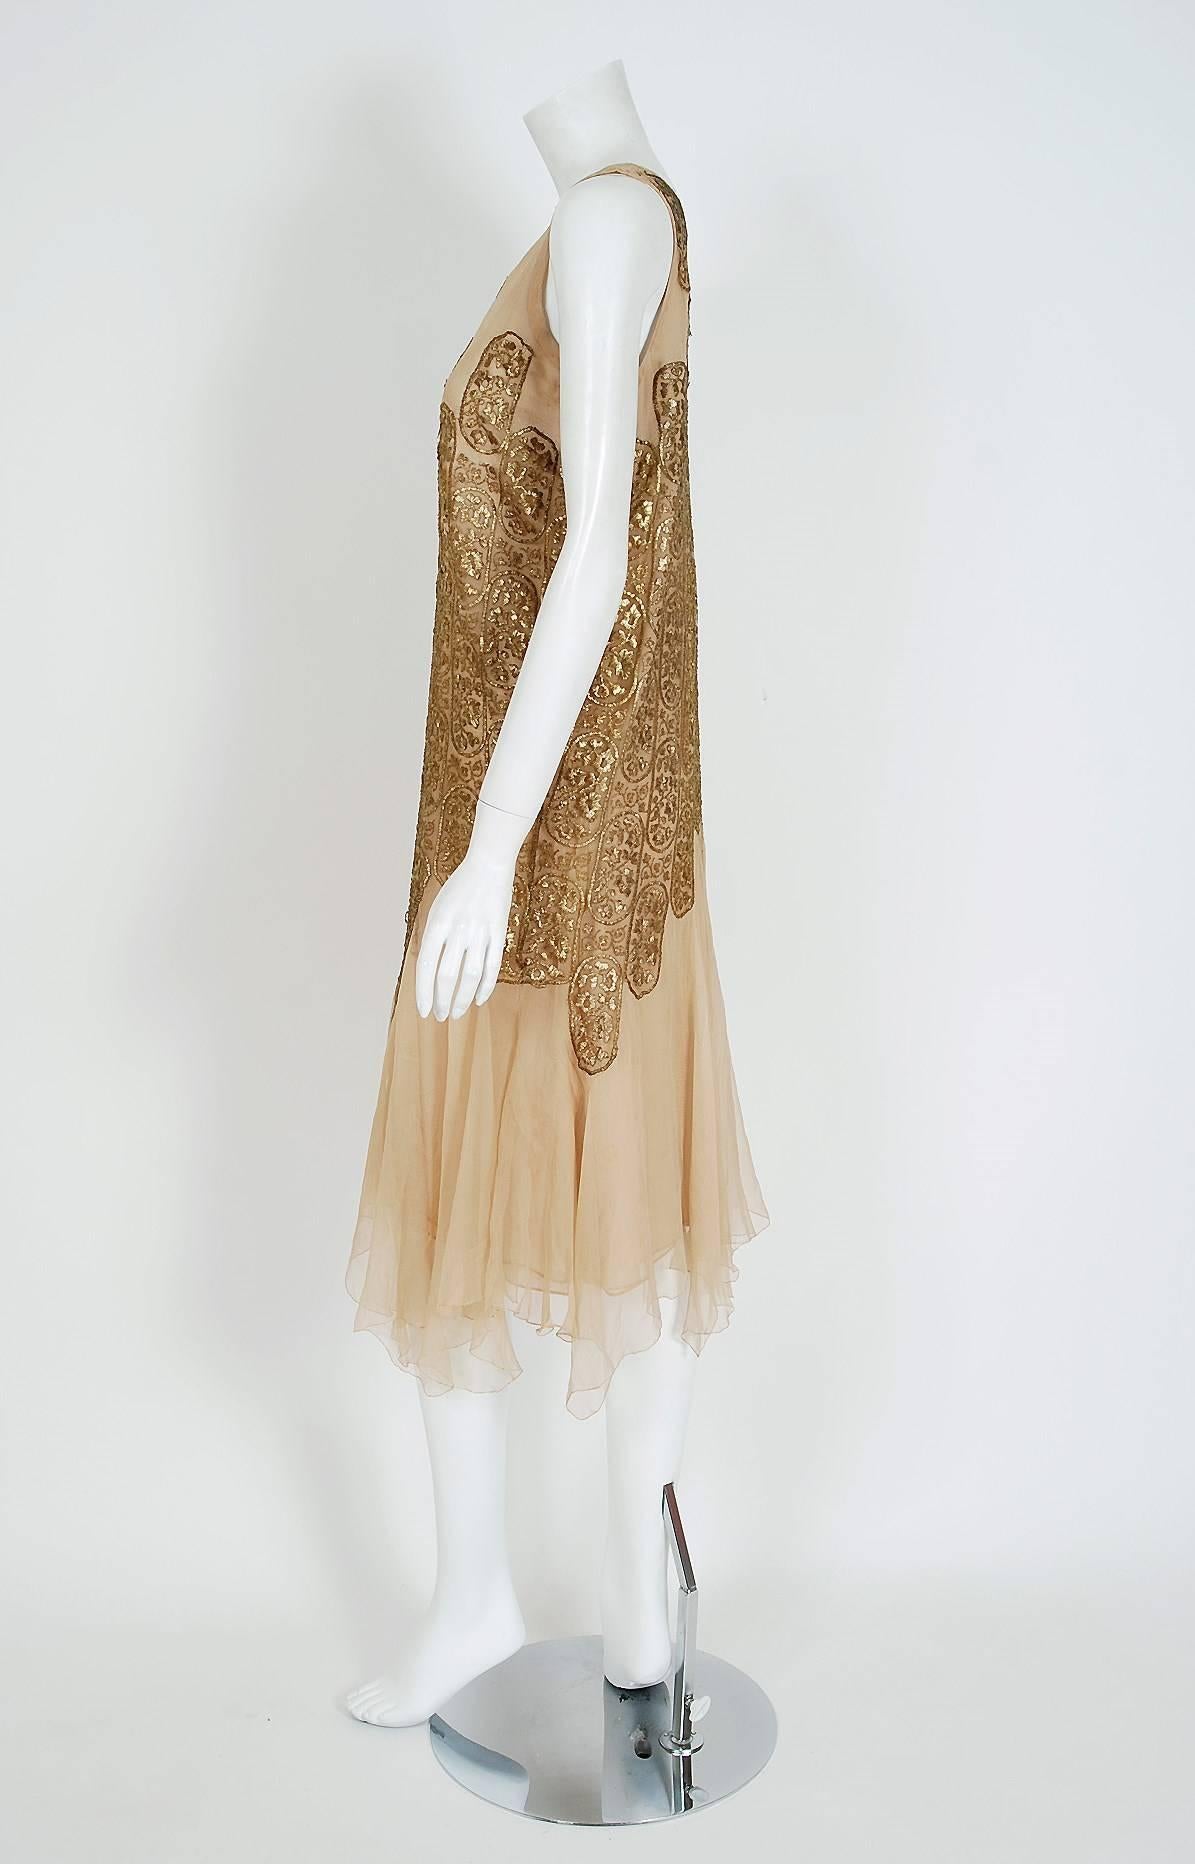 Breathtaking and ultra-rare Elspeth Champcommunal haute-couture metallic gold-lame and champagne silk-chiffon flapper dress dating back to 1925. Elspeth Champcommunal was a British fashion designer and the first editor of Vogue in Britain. She was